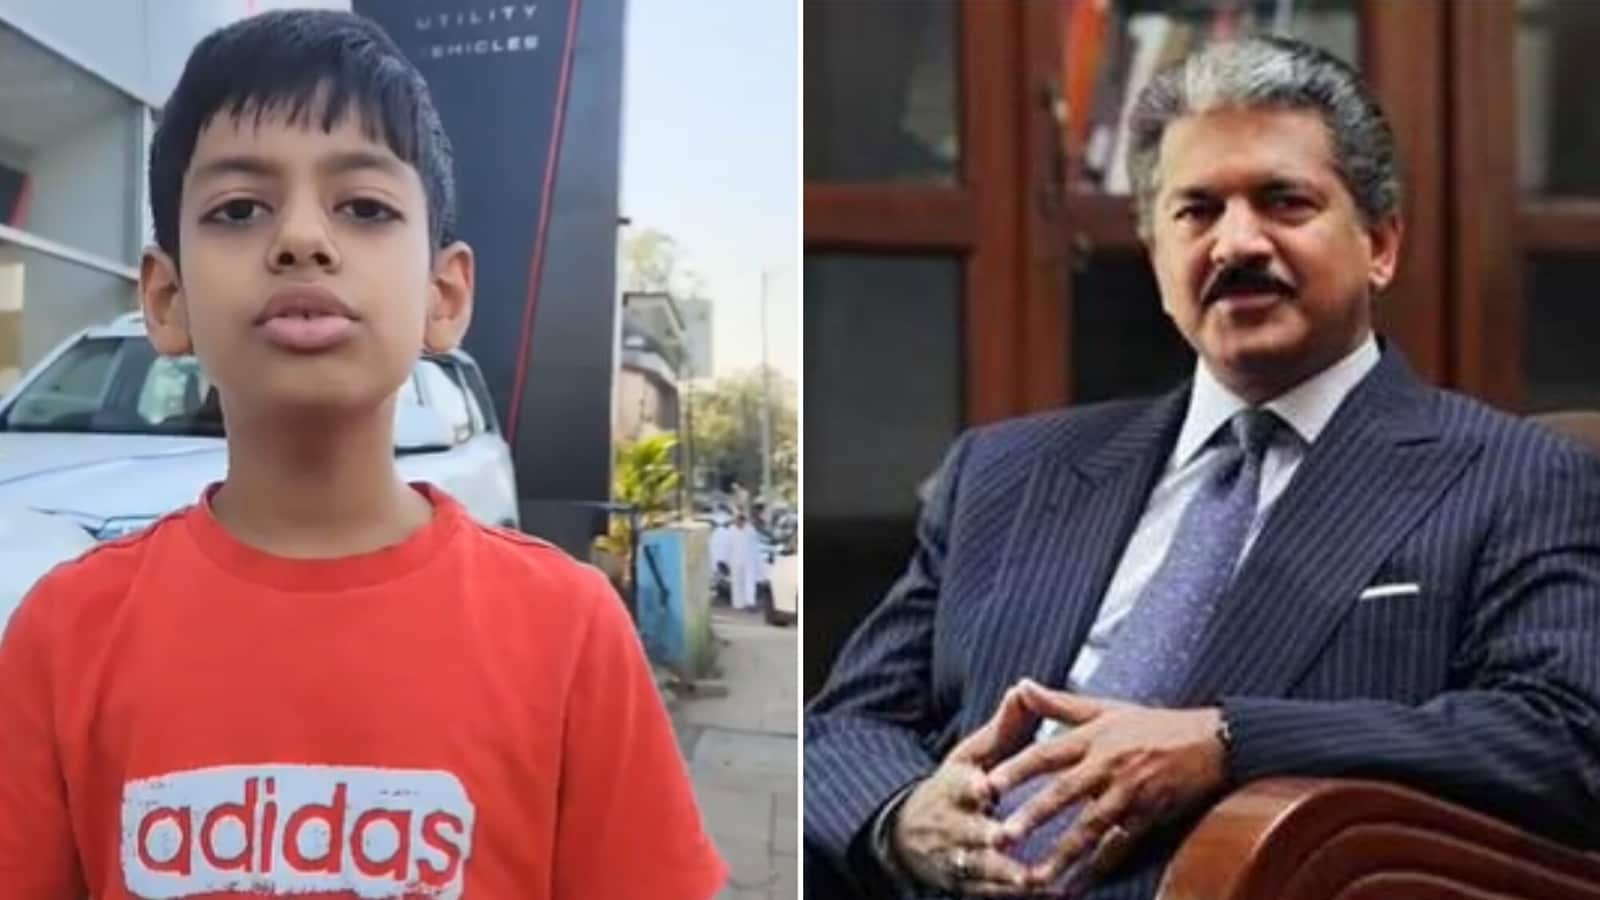 Anand Mahindra reacts to kid complaining about Mahindra showroom, says ‘You’re absolutely right’